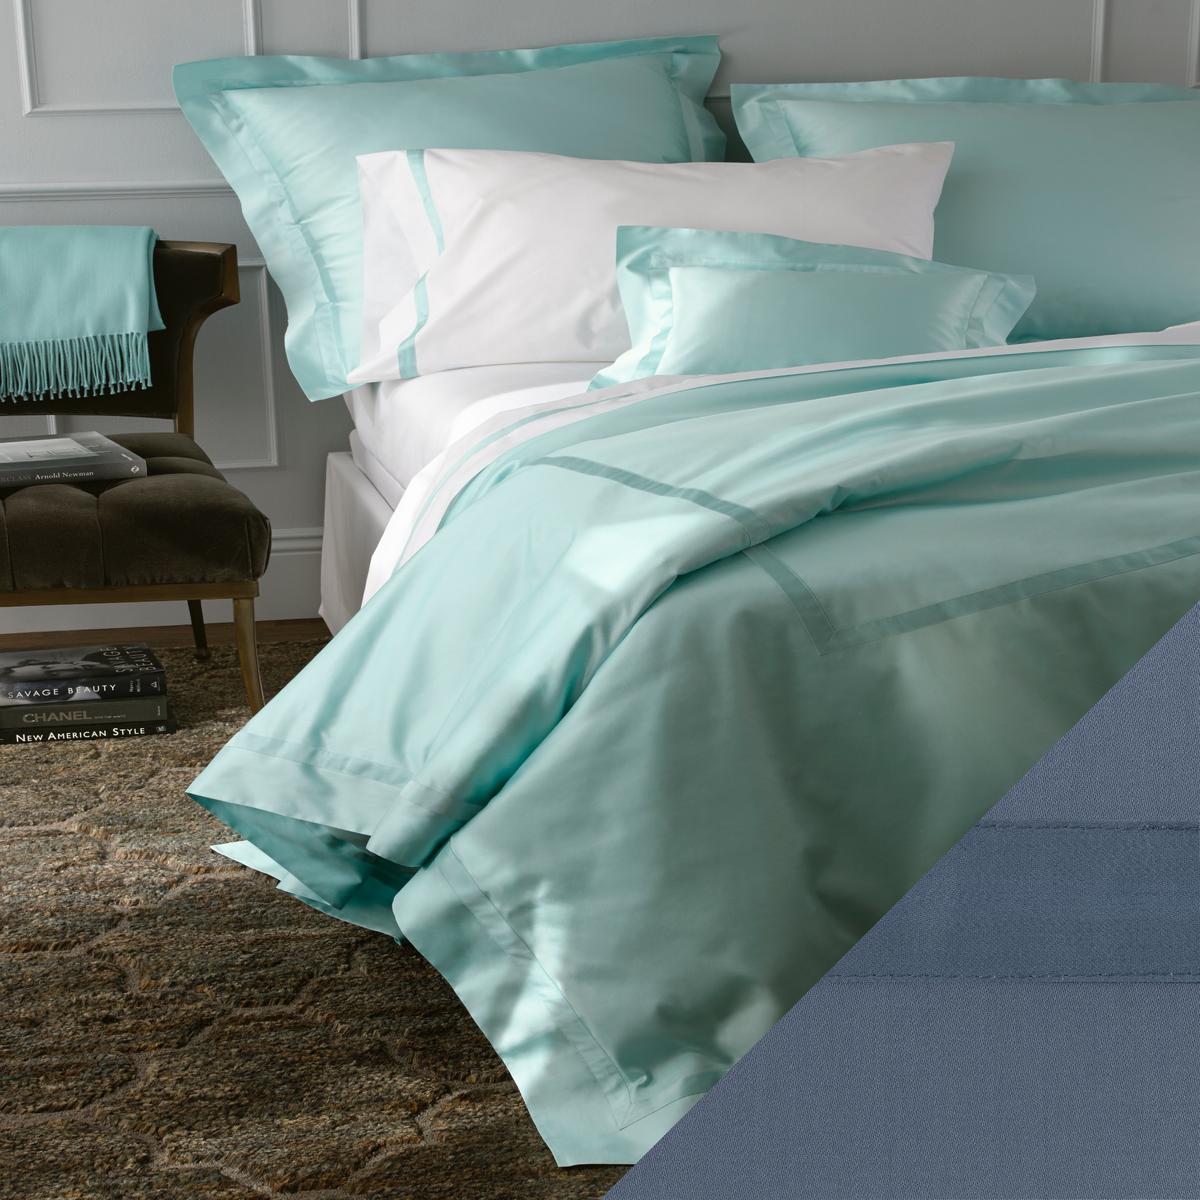 Matouk Nocturne Collection in Full Bedding with Steel Blue Colored Swatch